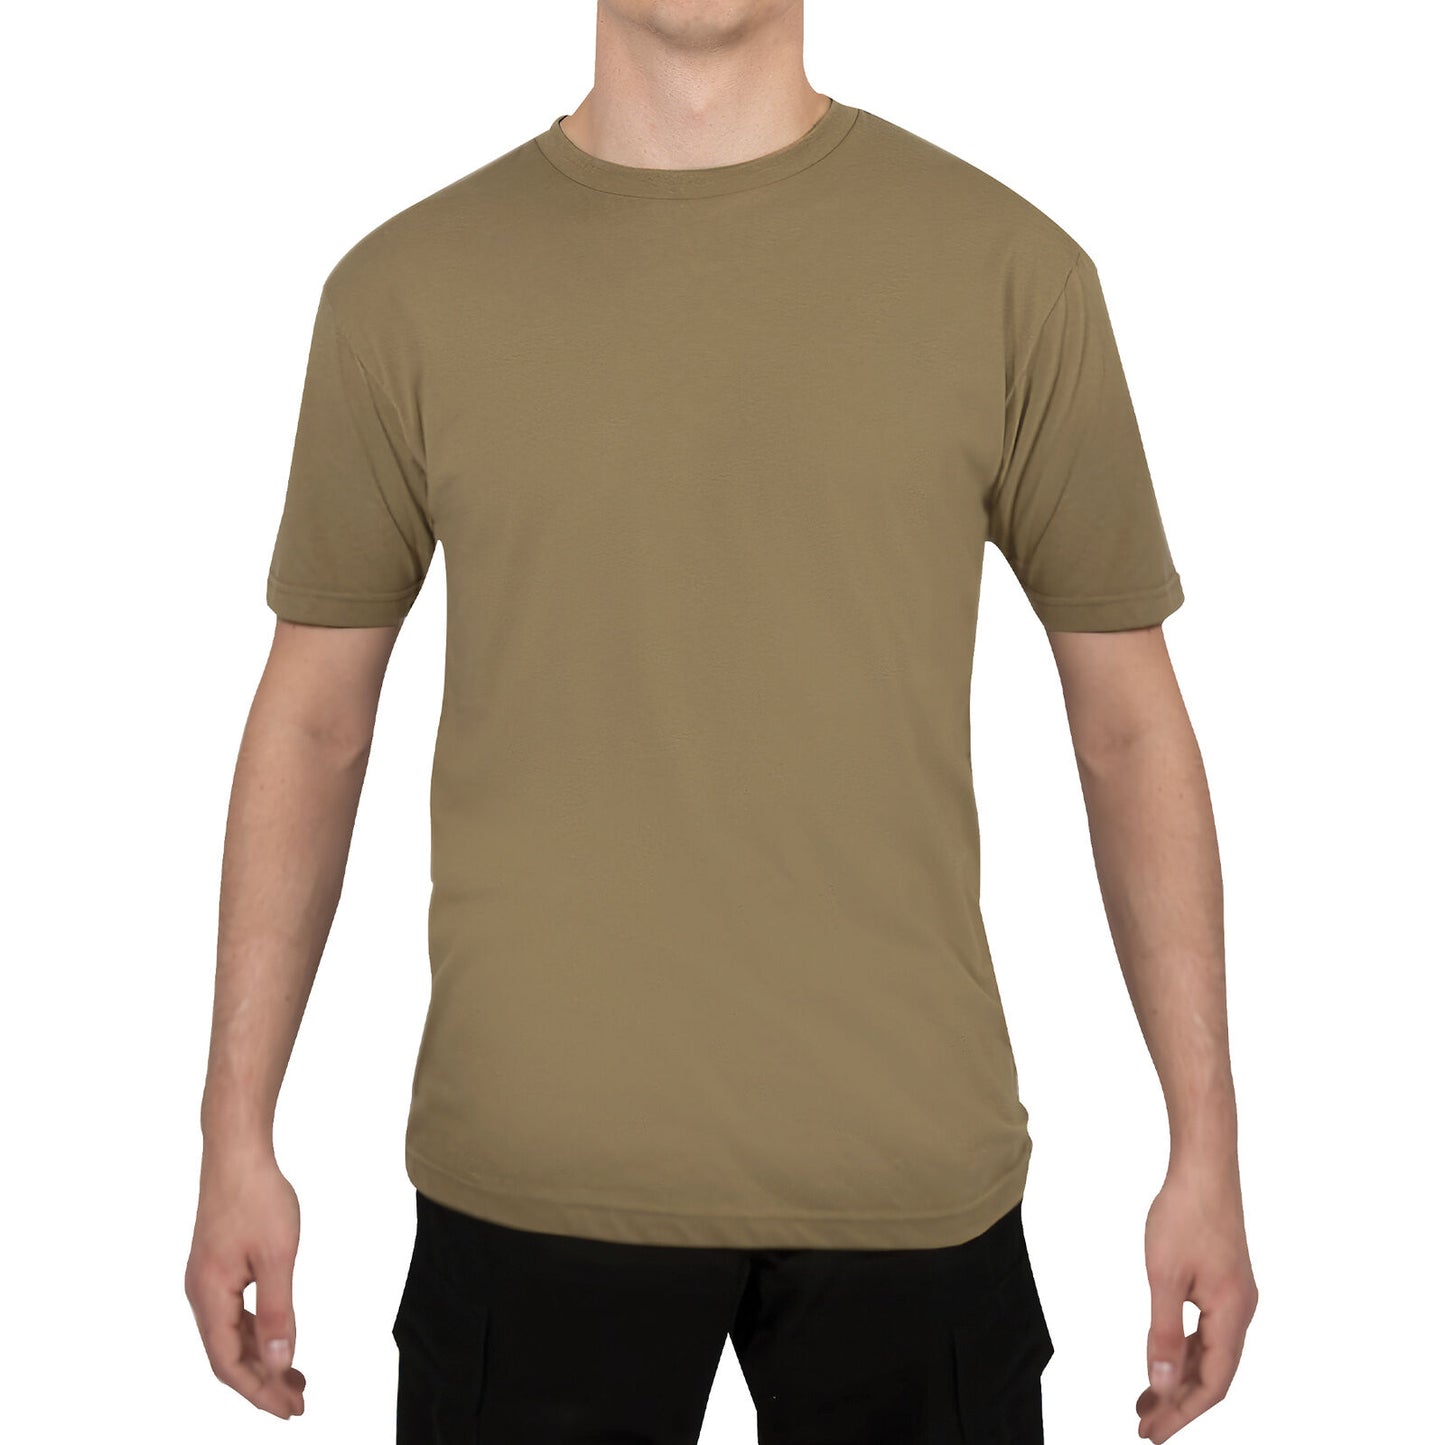 Men's Athletic Fit Solid Color T-Shirt in Brown - Rothco Poly/Cotton Undershirt